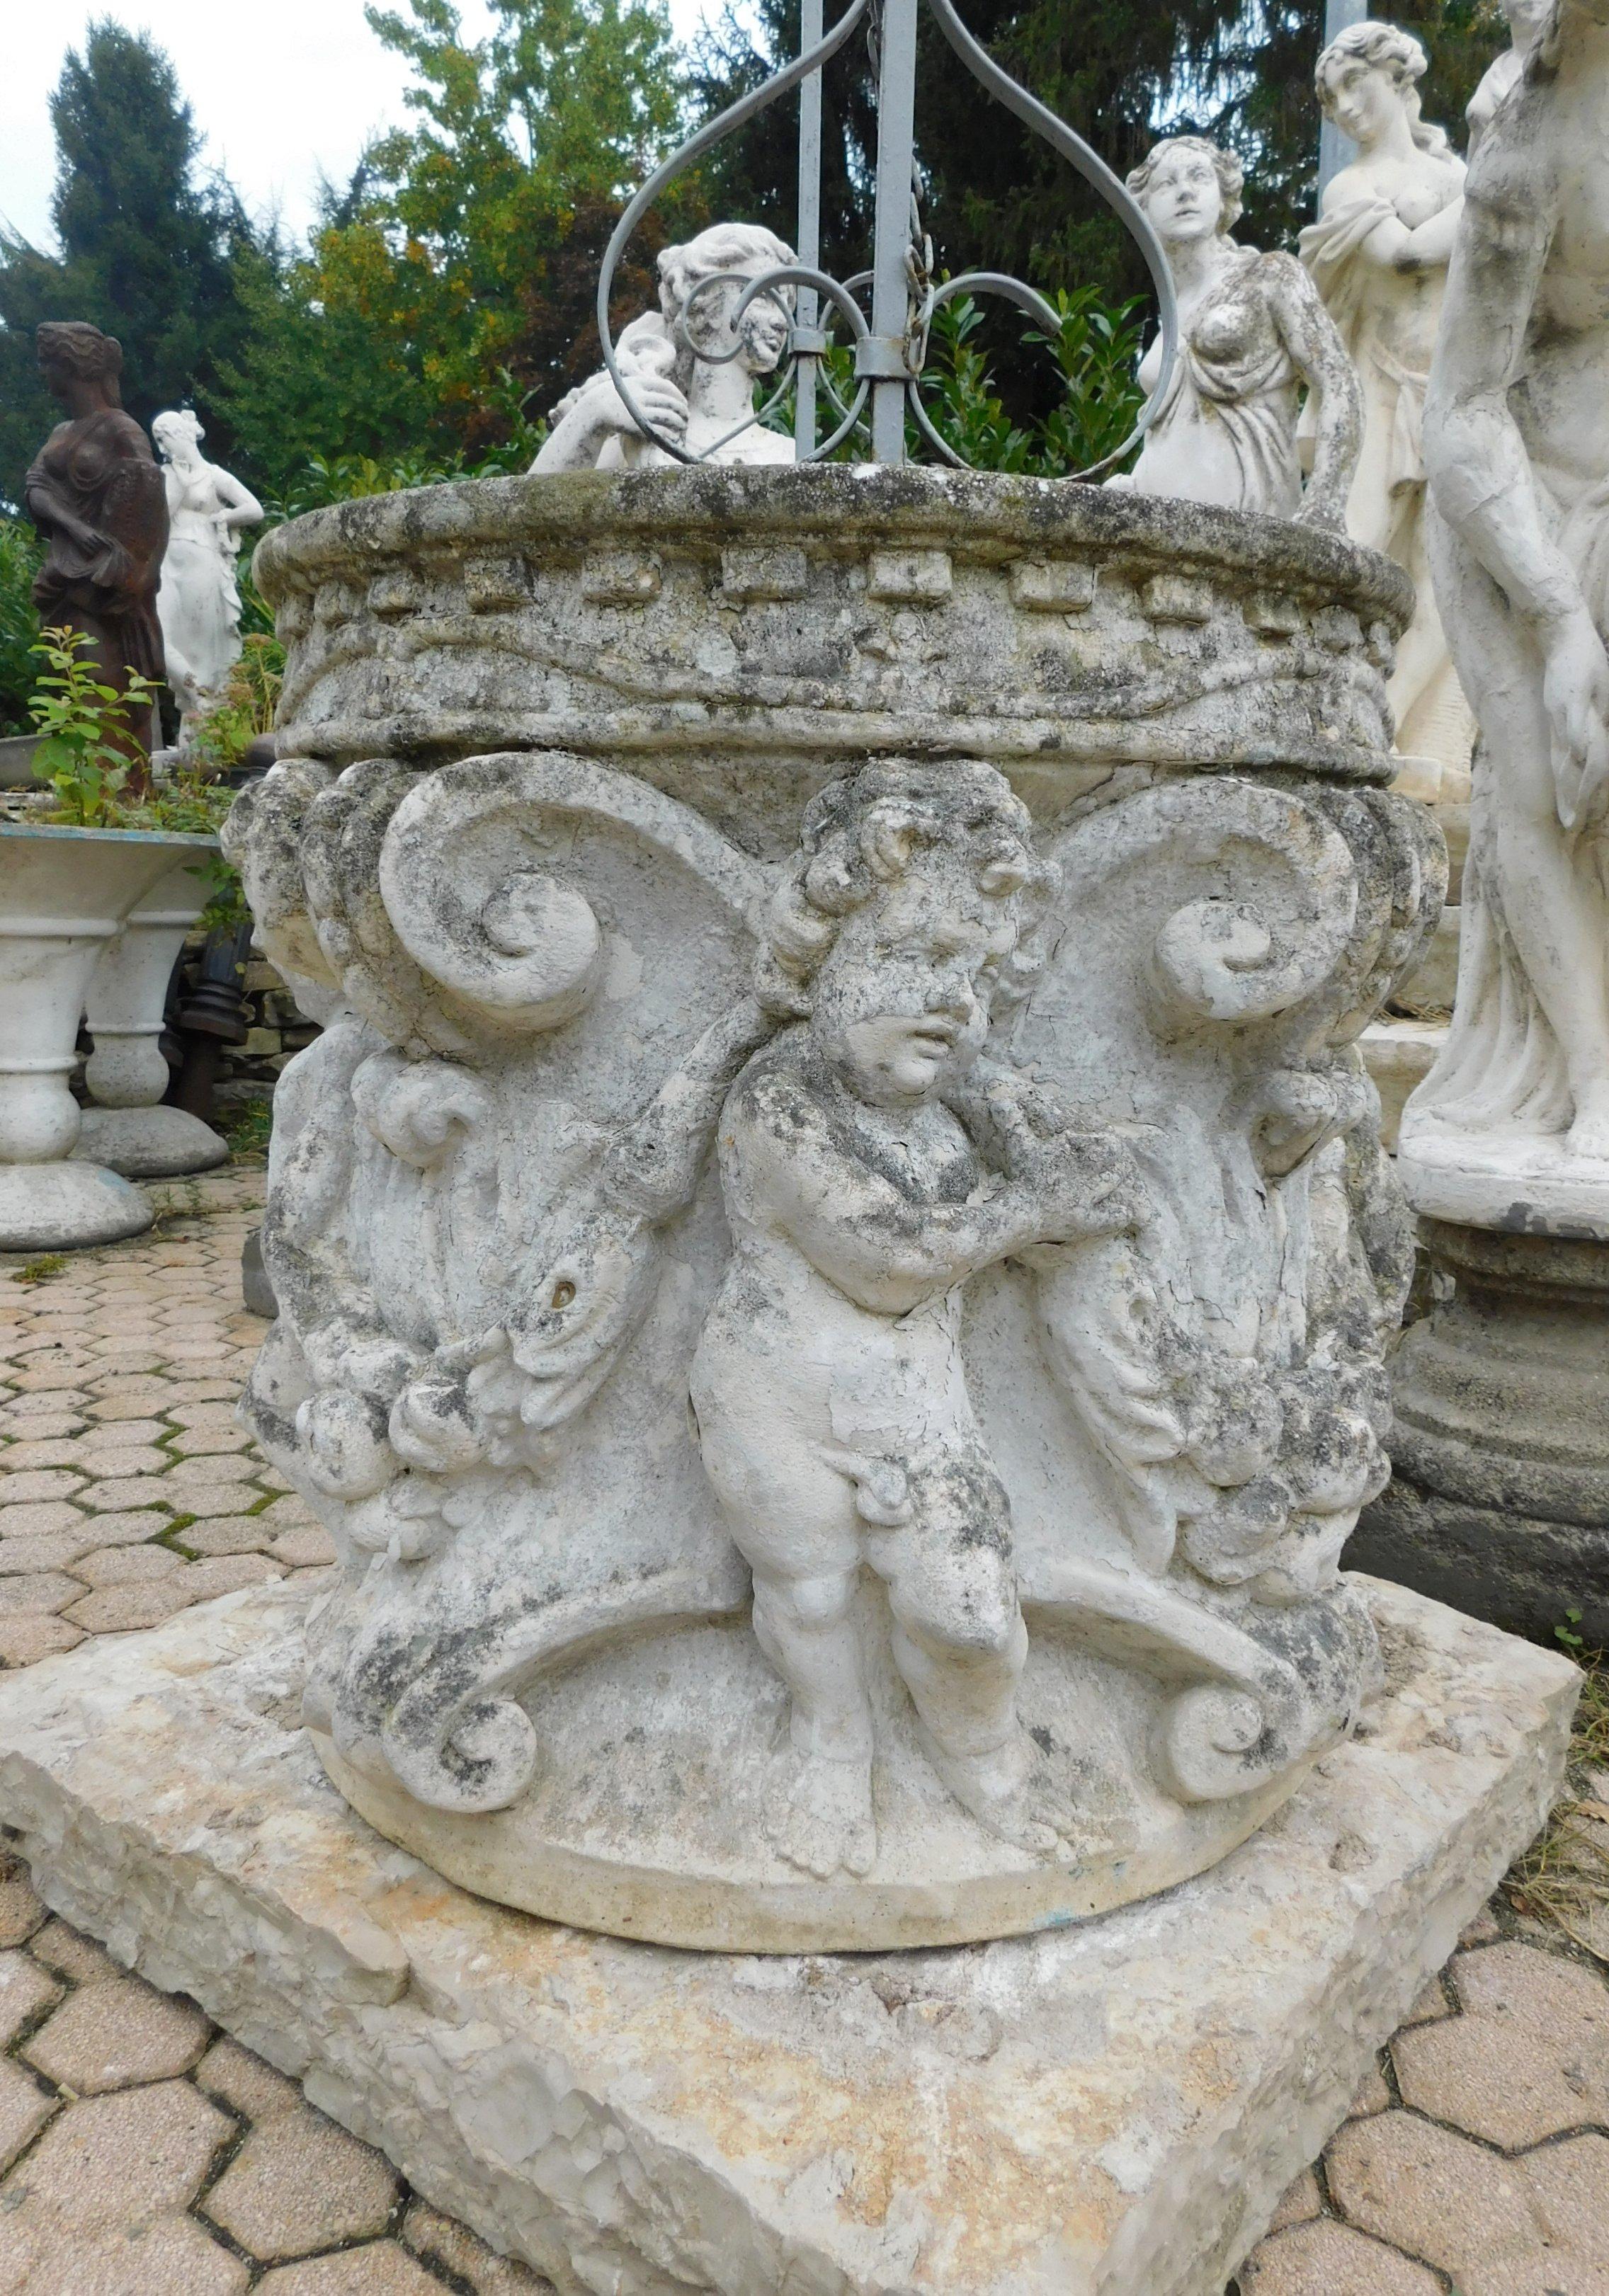 Antique Vicenza Stone Well with Sculptures of Cherubs and Festoons, 19th Century For Sale 1